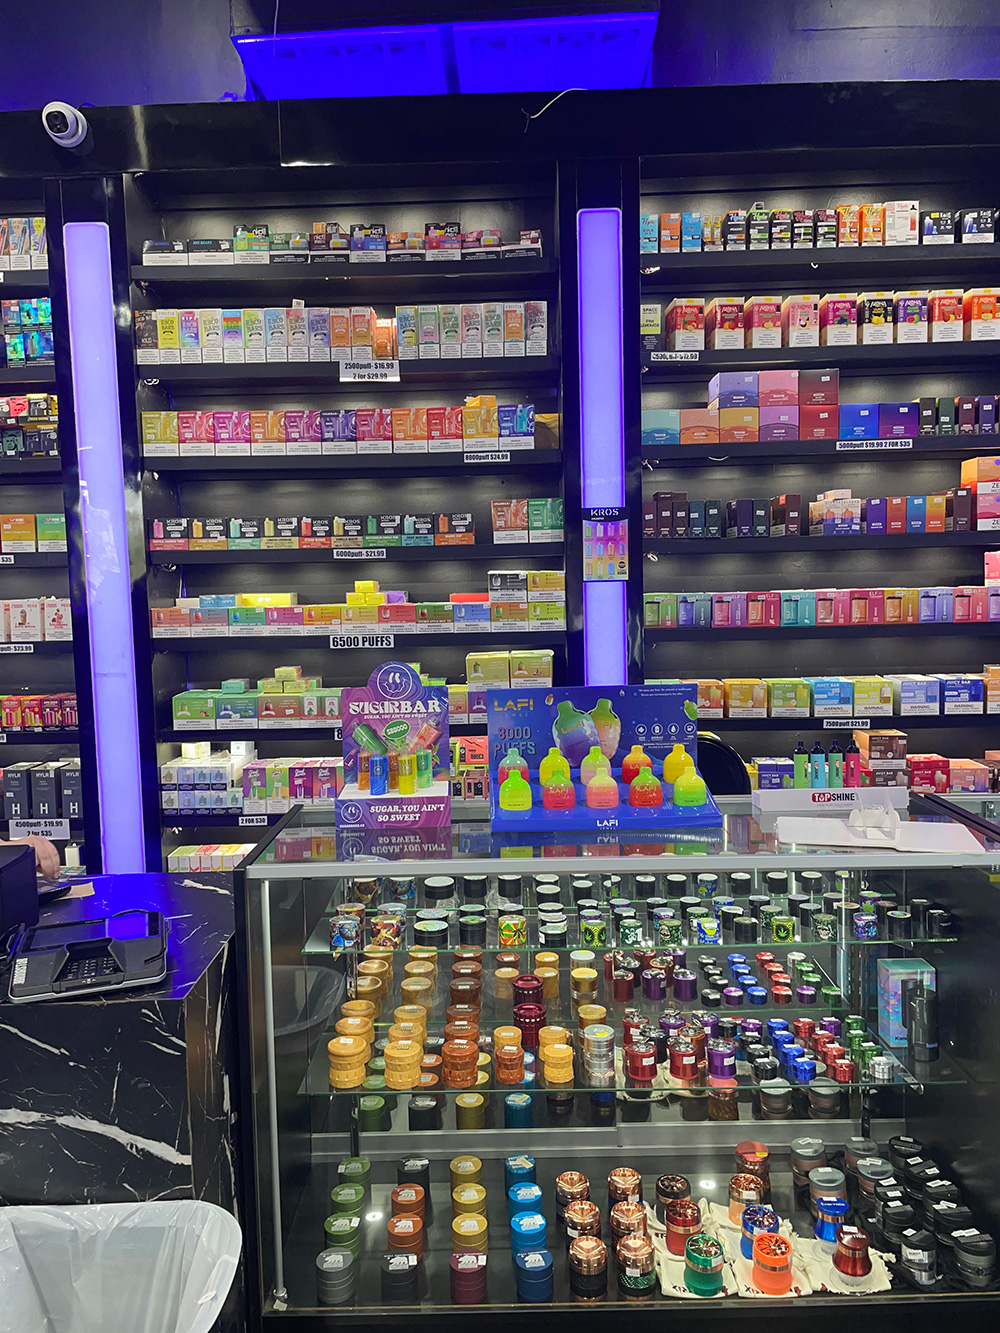 CBD & Vape Shop in Houston, TX | Home VaporFi Houston CBD & Vape is a leading vape shop in Houston, TX. We offer a juice mixing bar, CBD products, and customizable vaping devices. Click here!